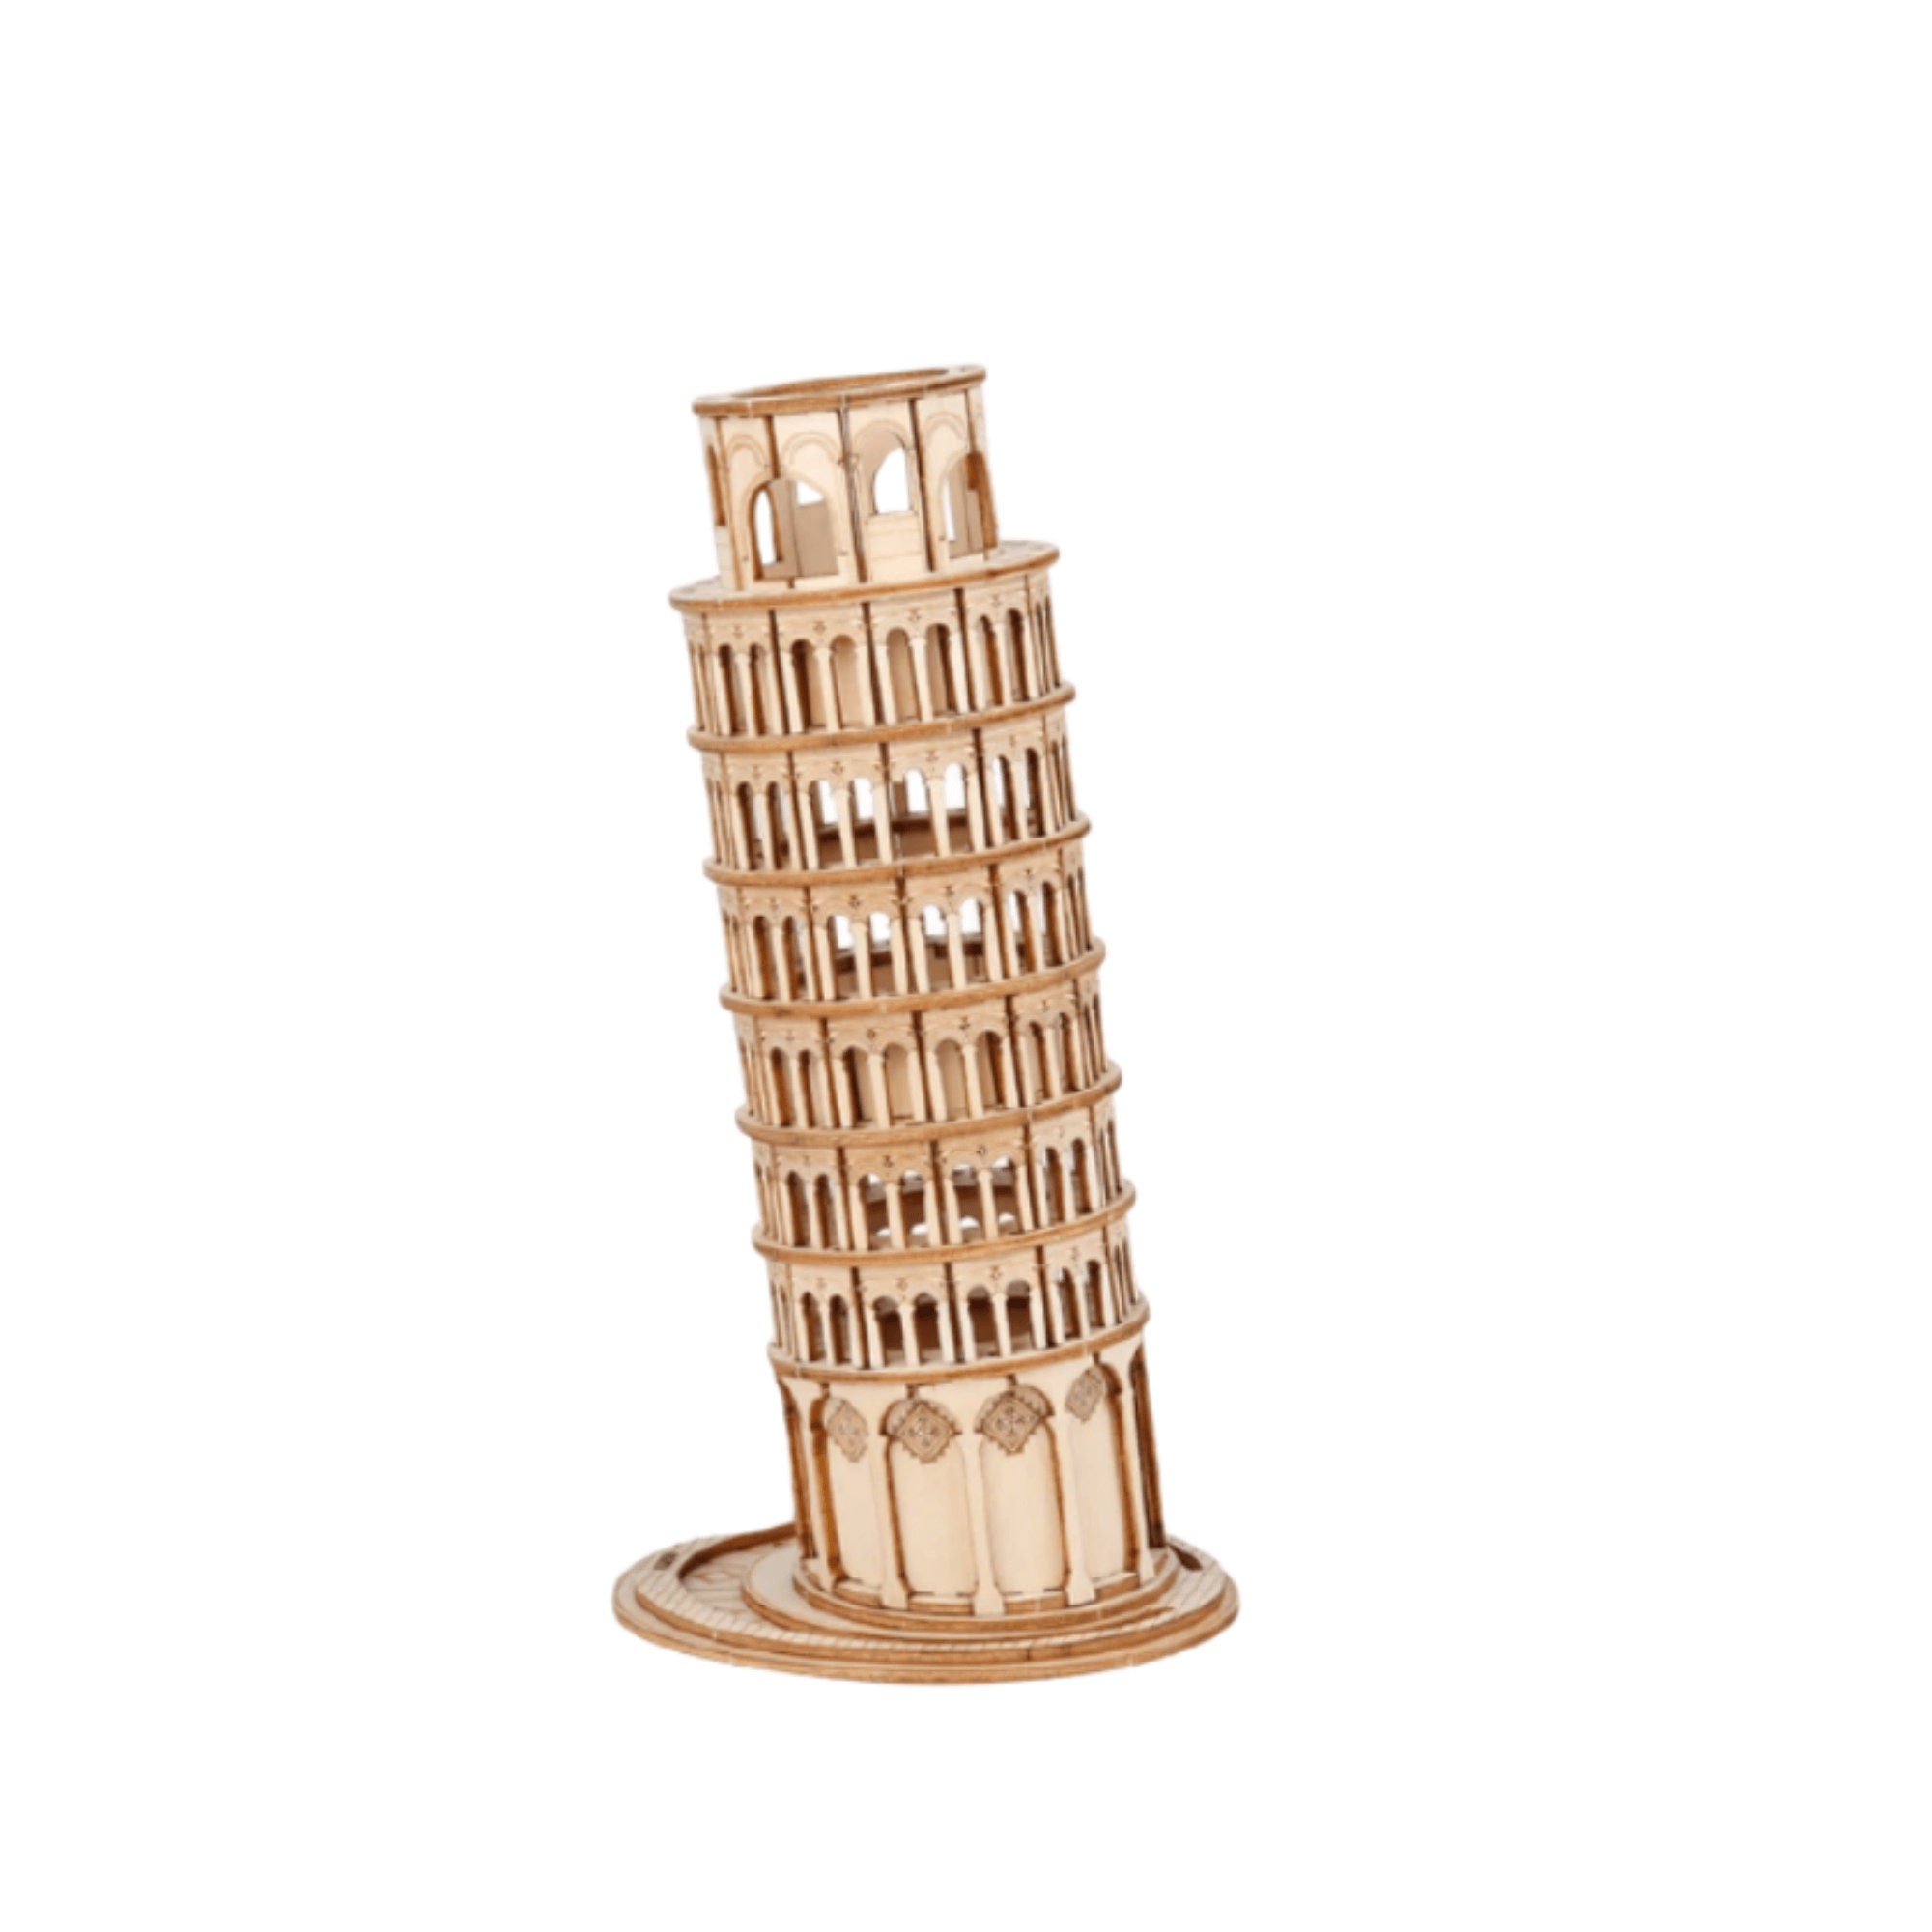 Leaning Tower of Pisa Italy 3-D Wooden Puzzle DIY Puzzle - Etsy